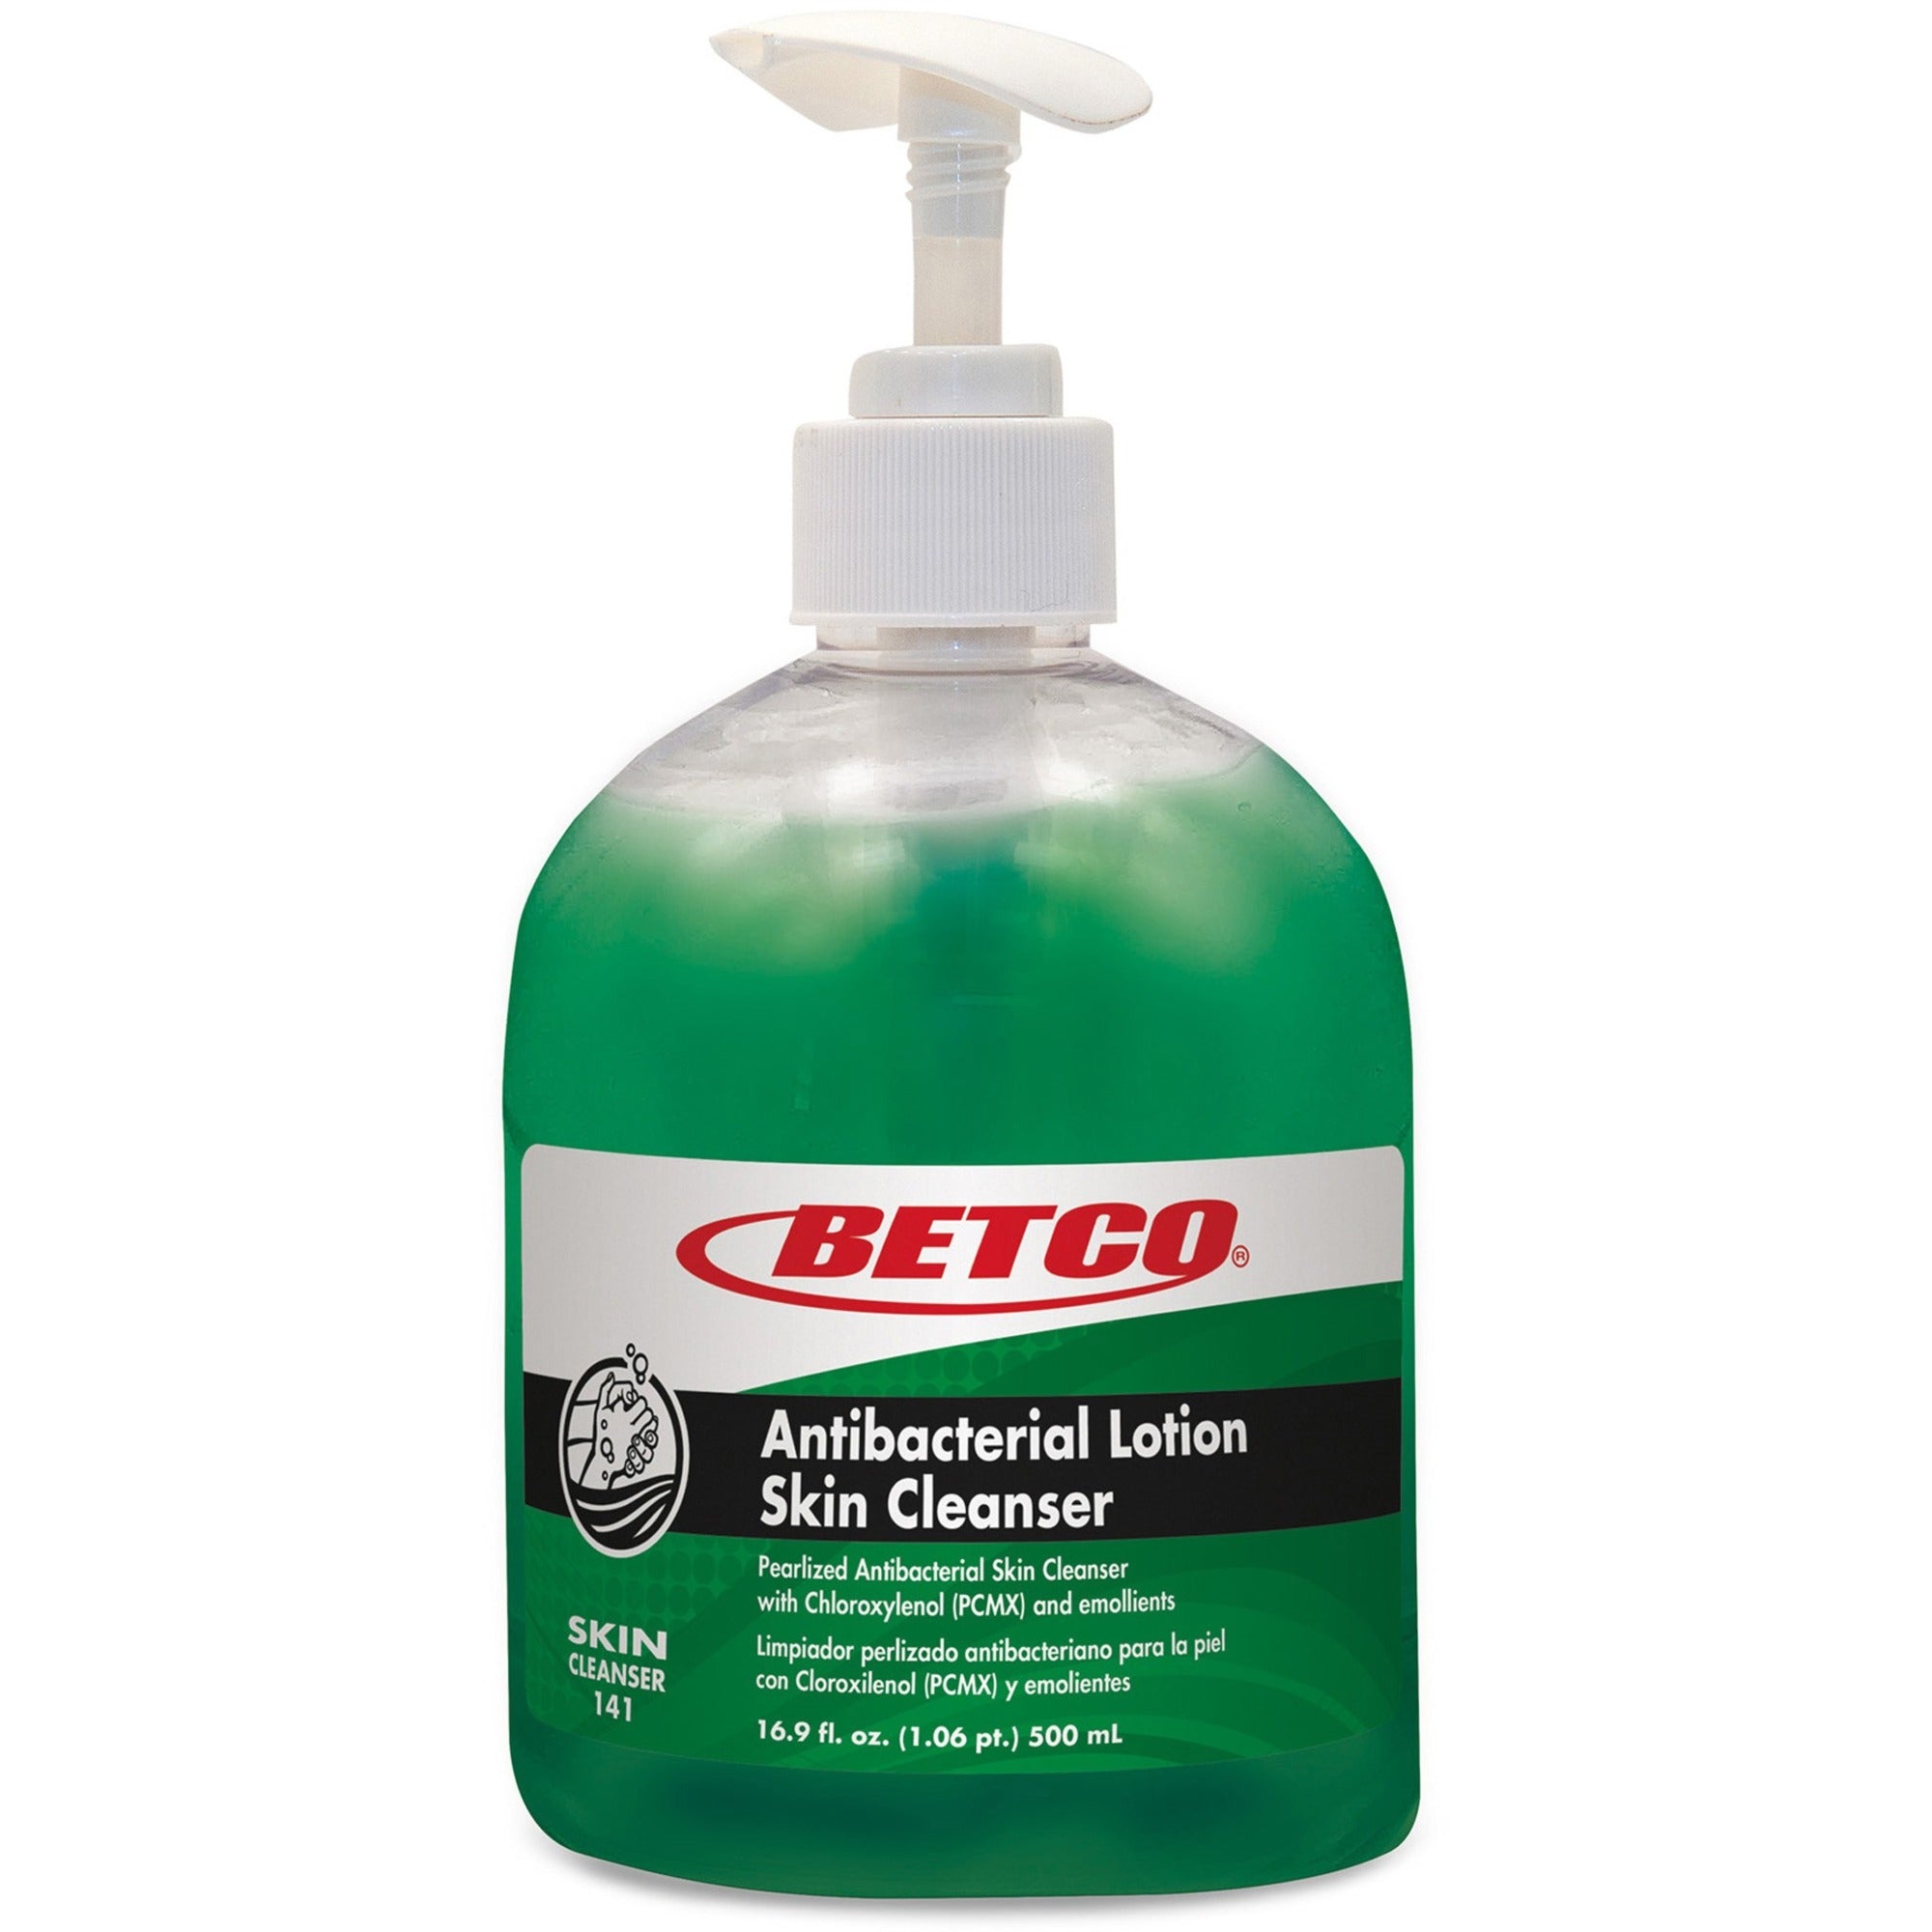 betco-antibacterial-lotion-skin-cleanser-lotion-1691-fl-oz-tropical-hibiscus-pump-bottle-applicable-on-hand-skin-anti-bacterial-moisturising-residue-free-dirt-resistant-1-each_bet141e900 - 1